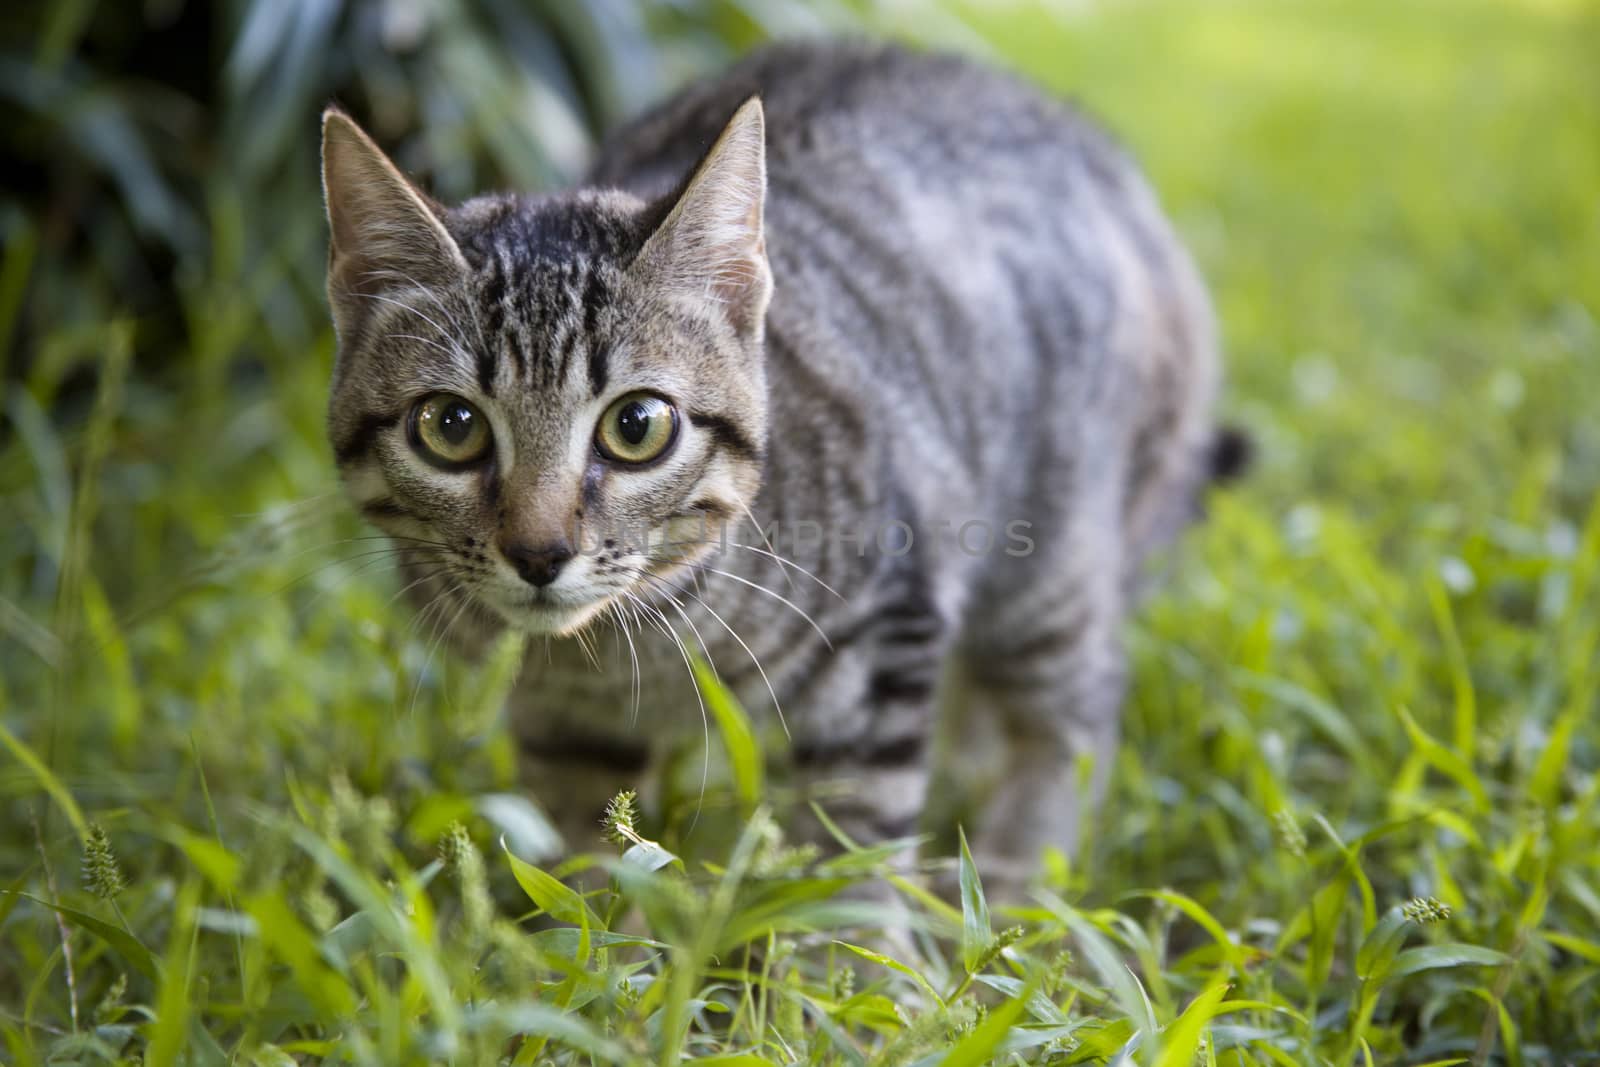 The cat sneaks through the thick grass. Tabby cat walks in the garden. Juicy greens on the lawn.